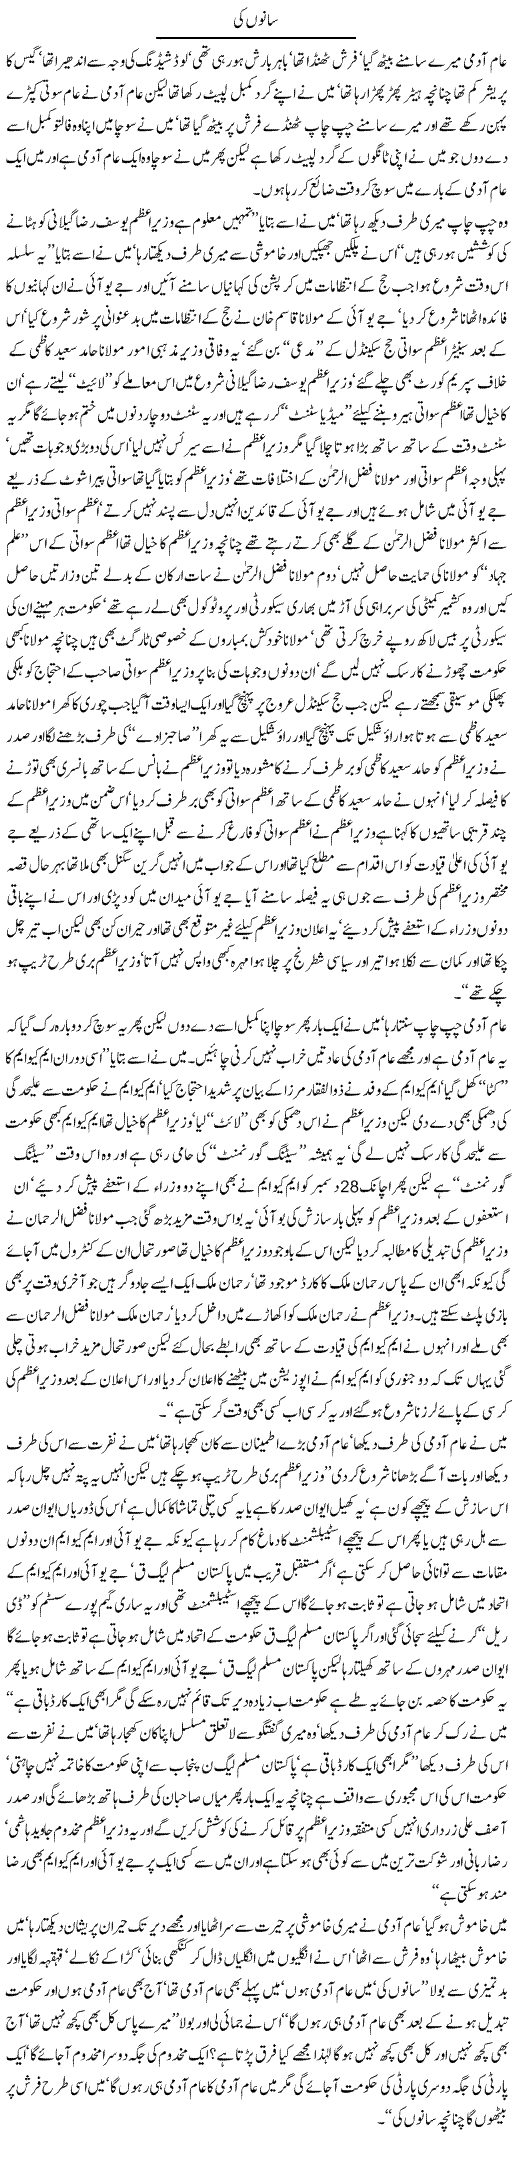 Meeting With a Man Express Column Javed Chaudhry 4 January 2011